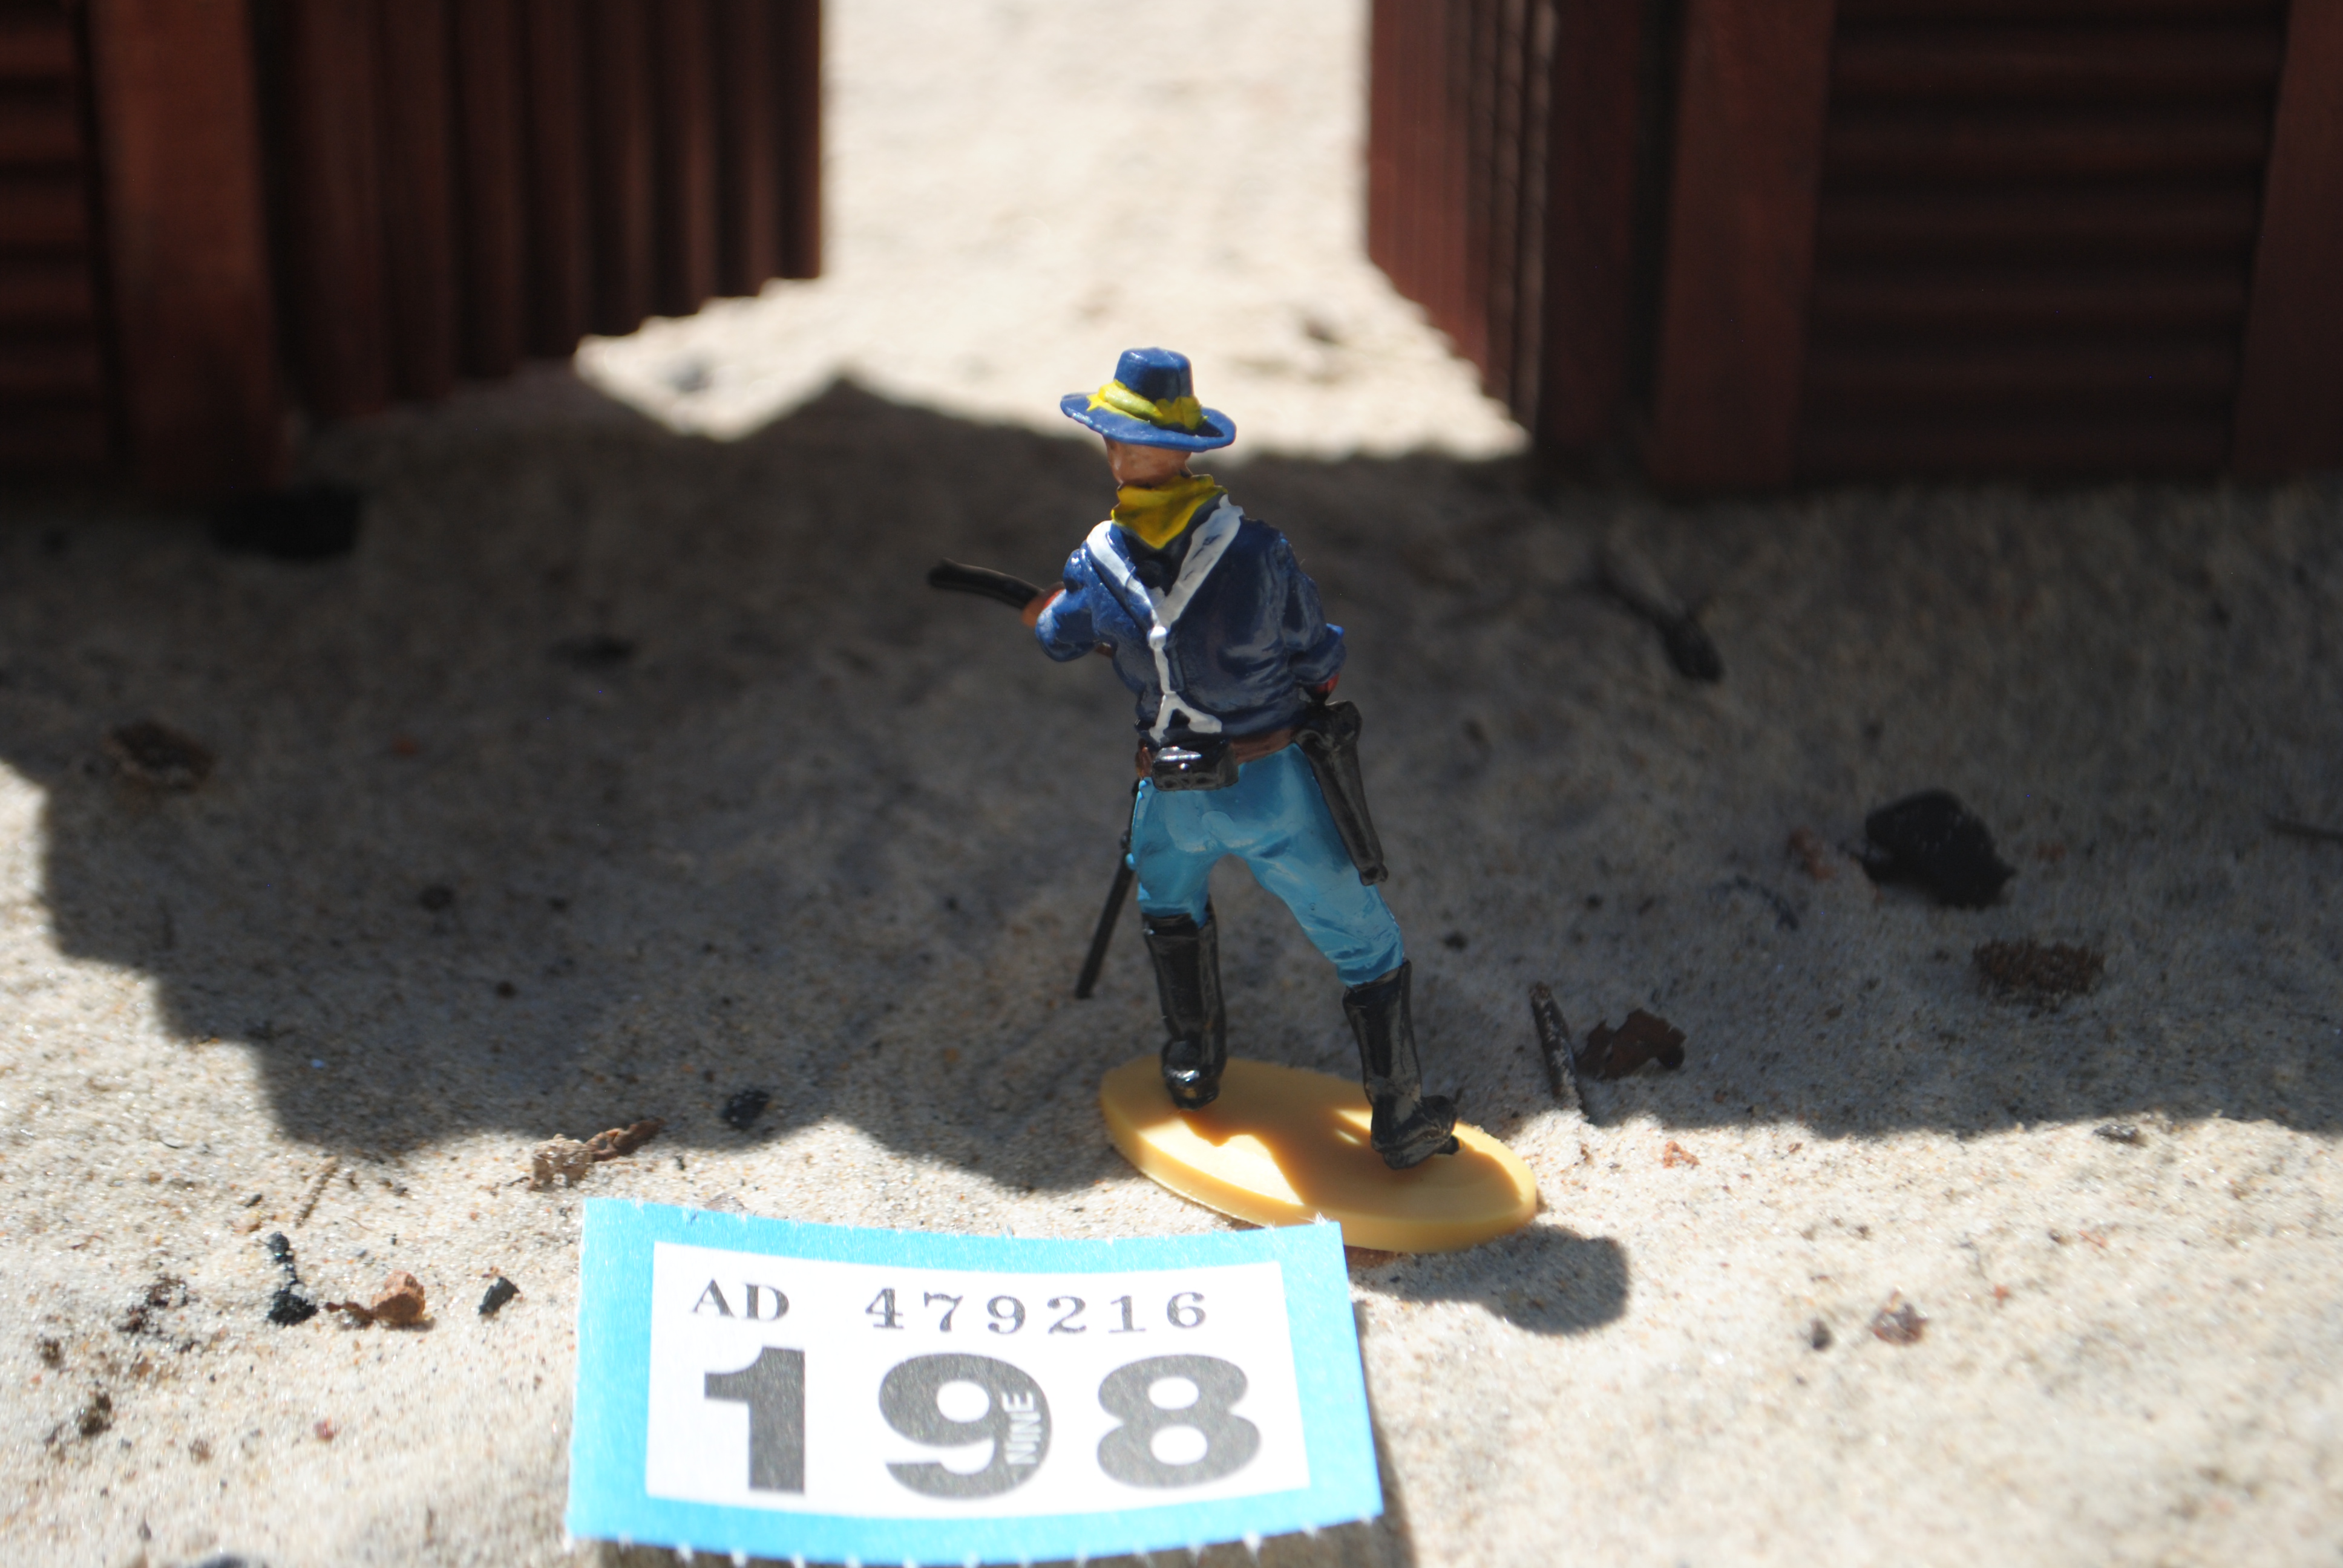 Britains Toys B.198 US Union Army Soldier standing 'American Civil War'